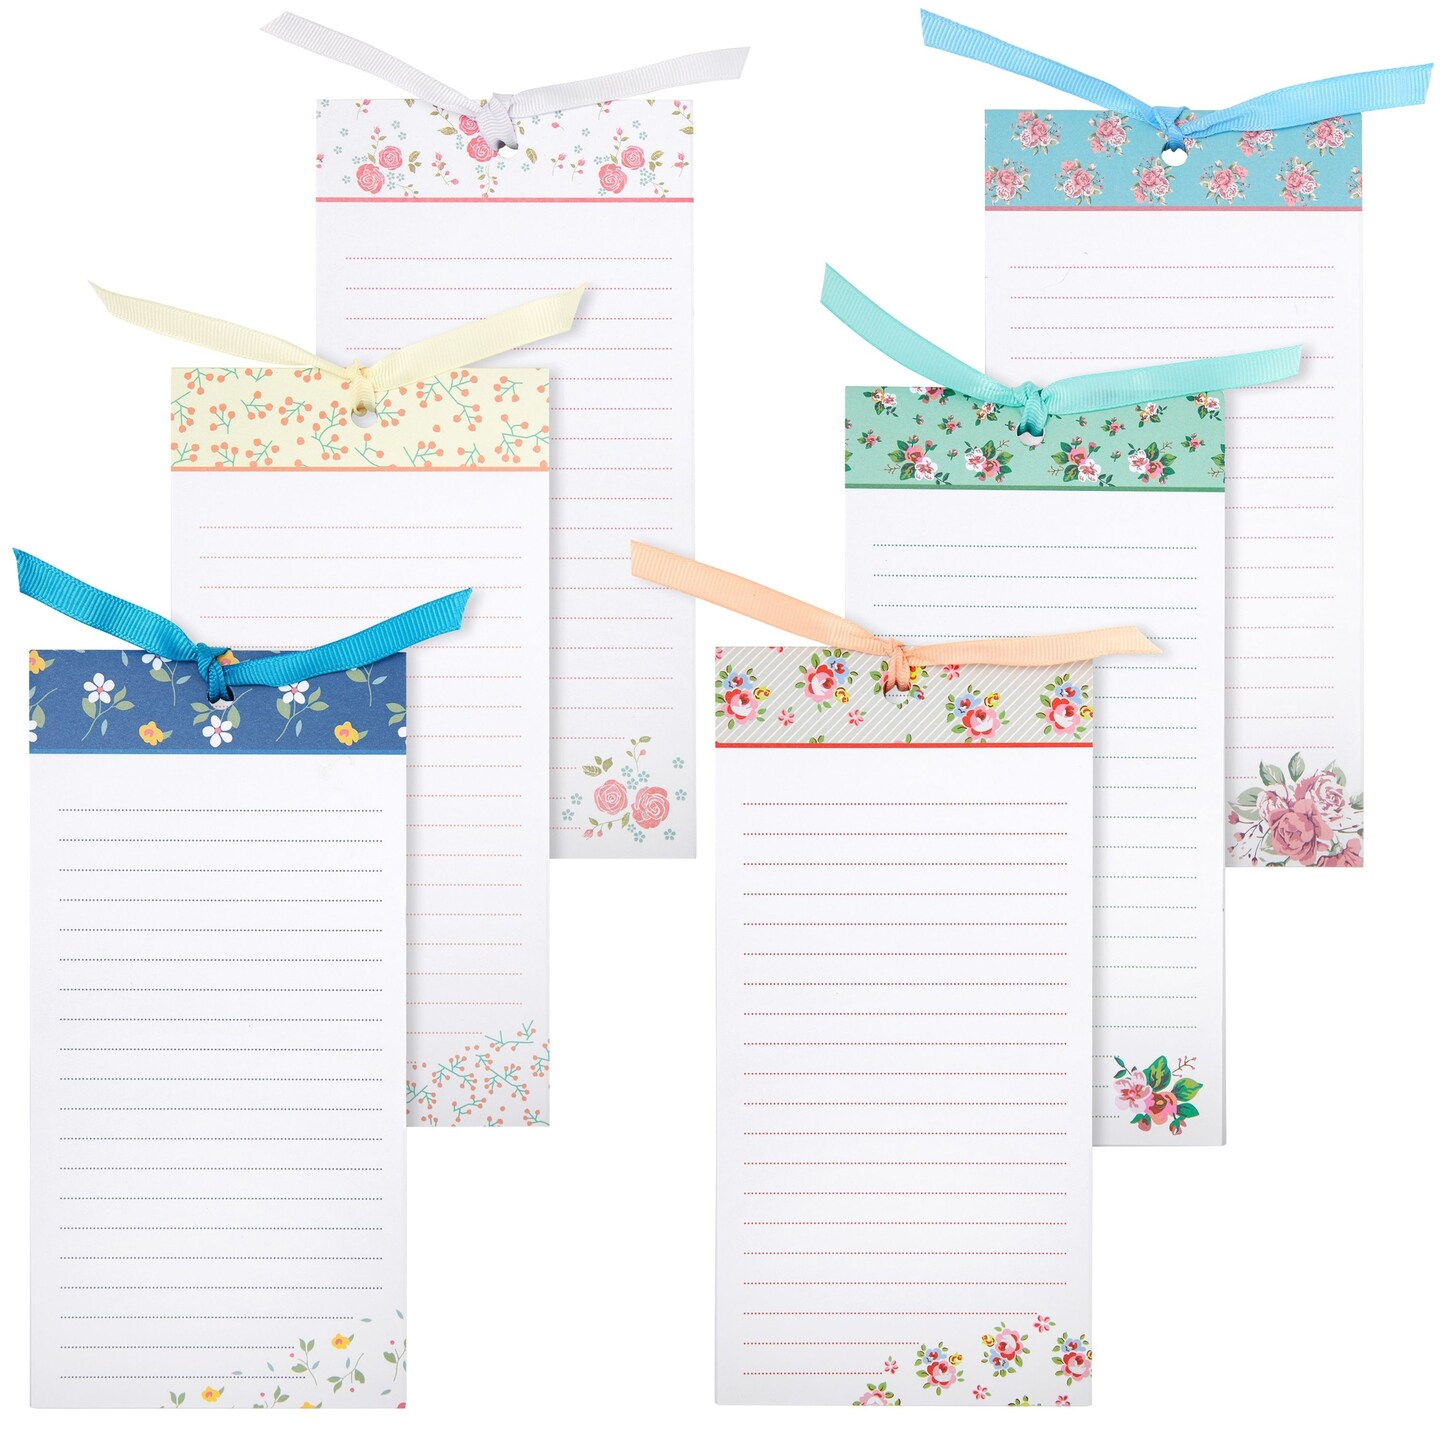 6-Pack Magnetic Notepads for Refrigerator - Floral Shopping List, To-Do, Memo, Scratch Pads (4x8 In, 60 Sheets Each)